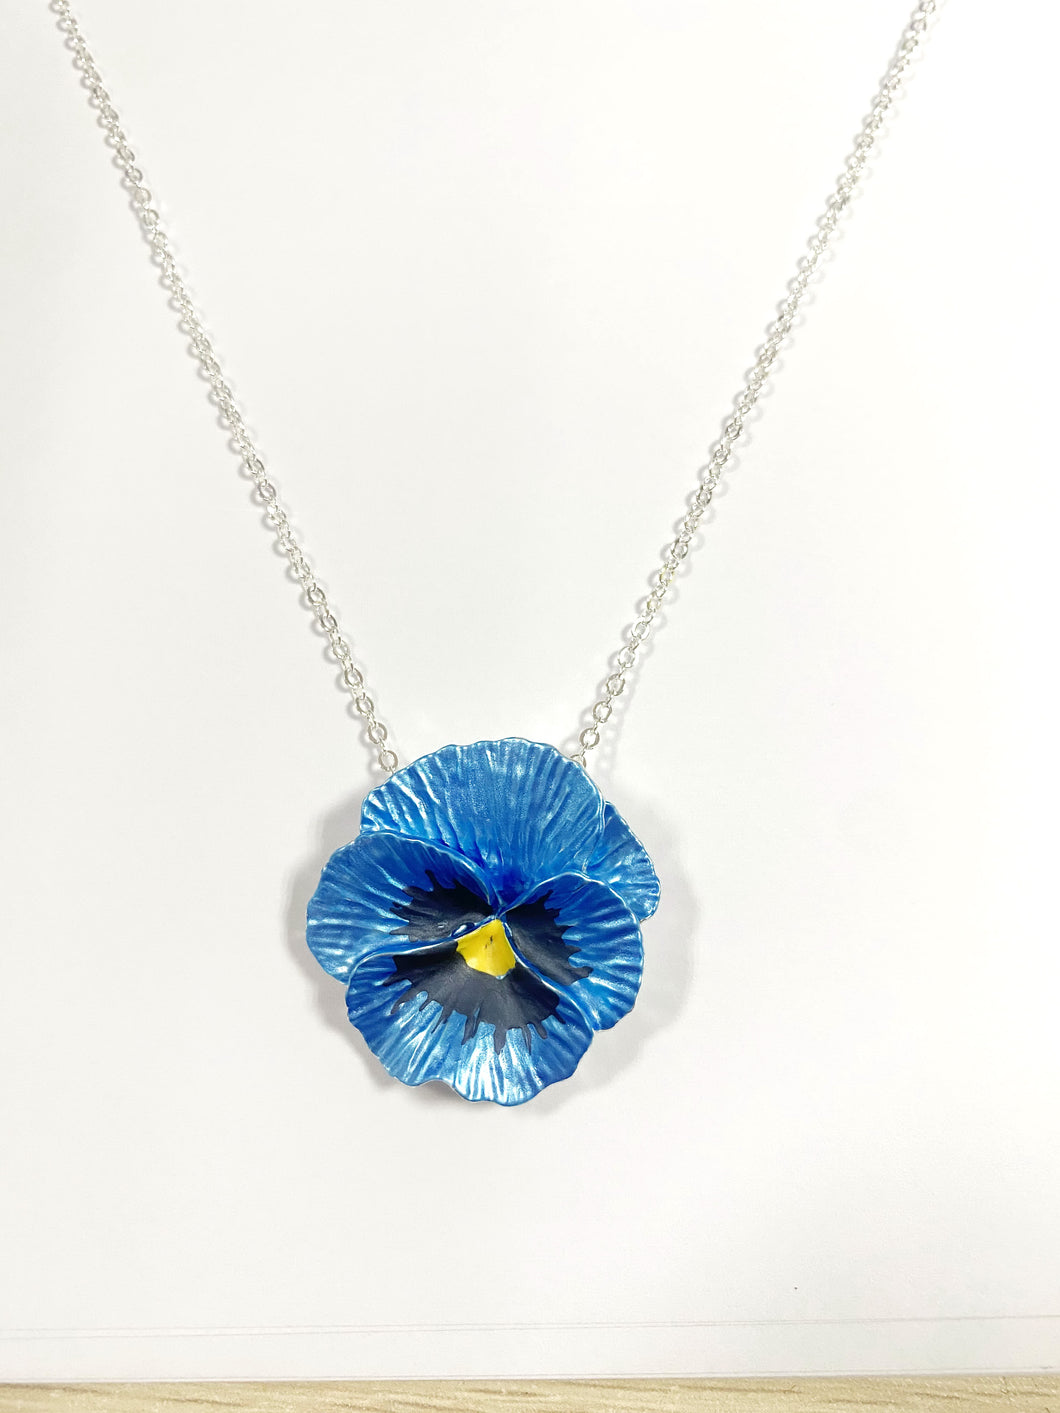 Blue pansy pendant and chain